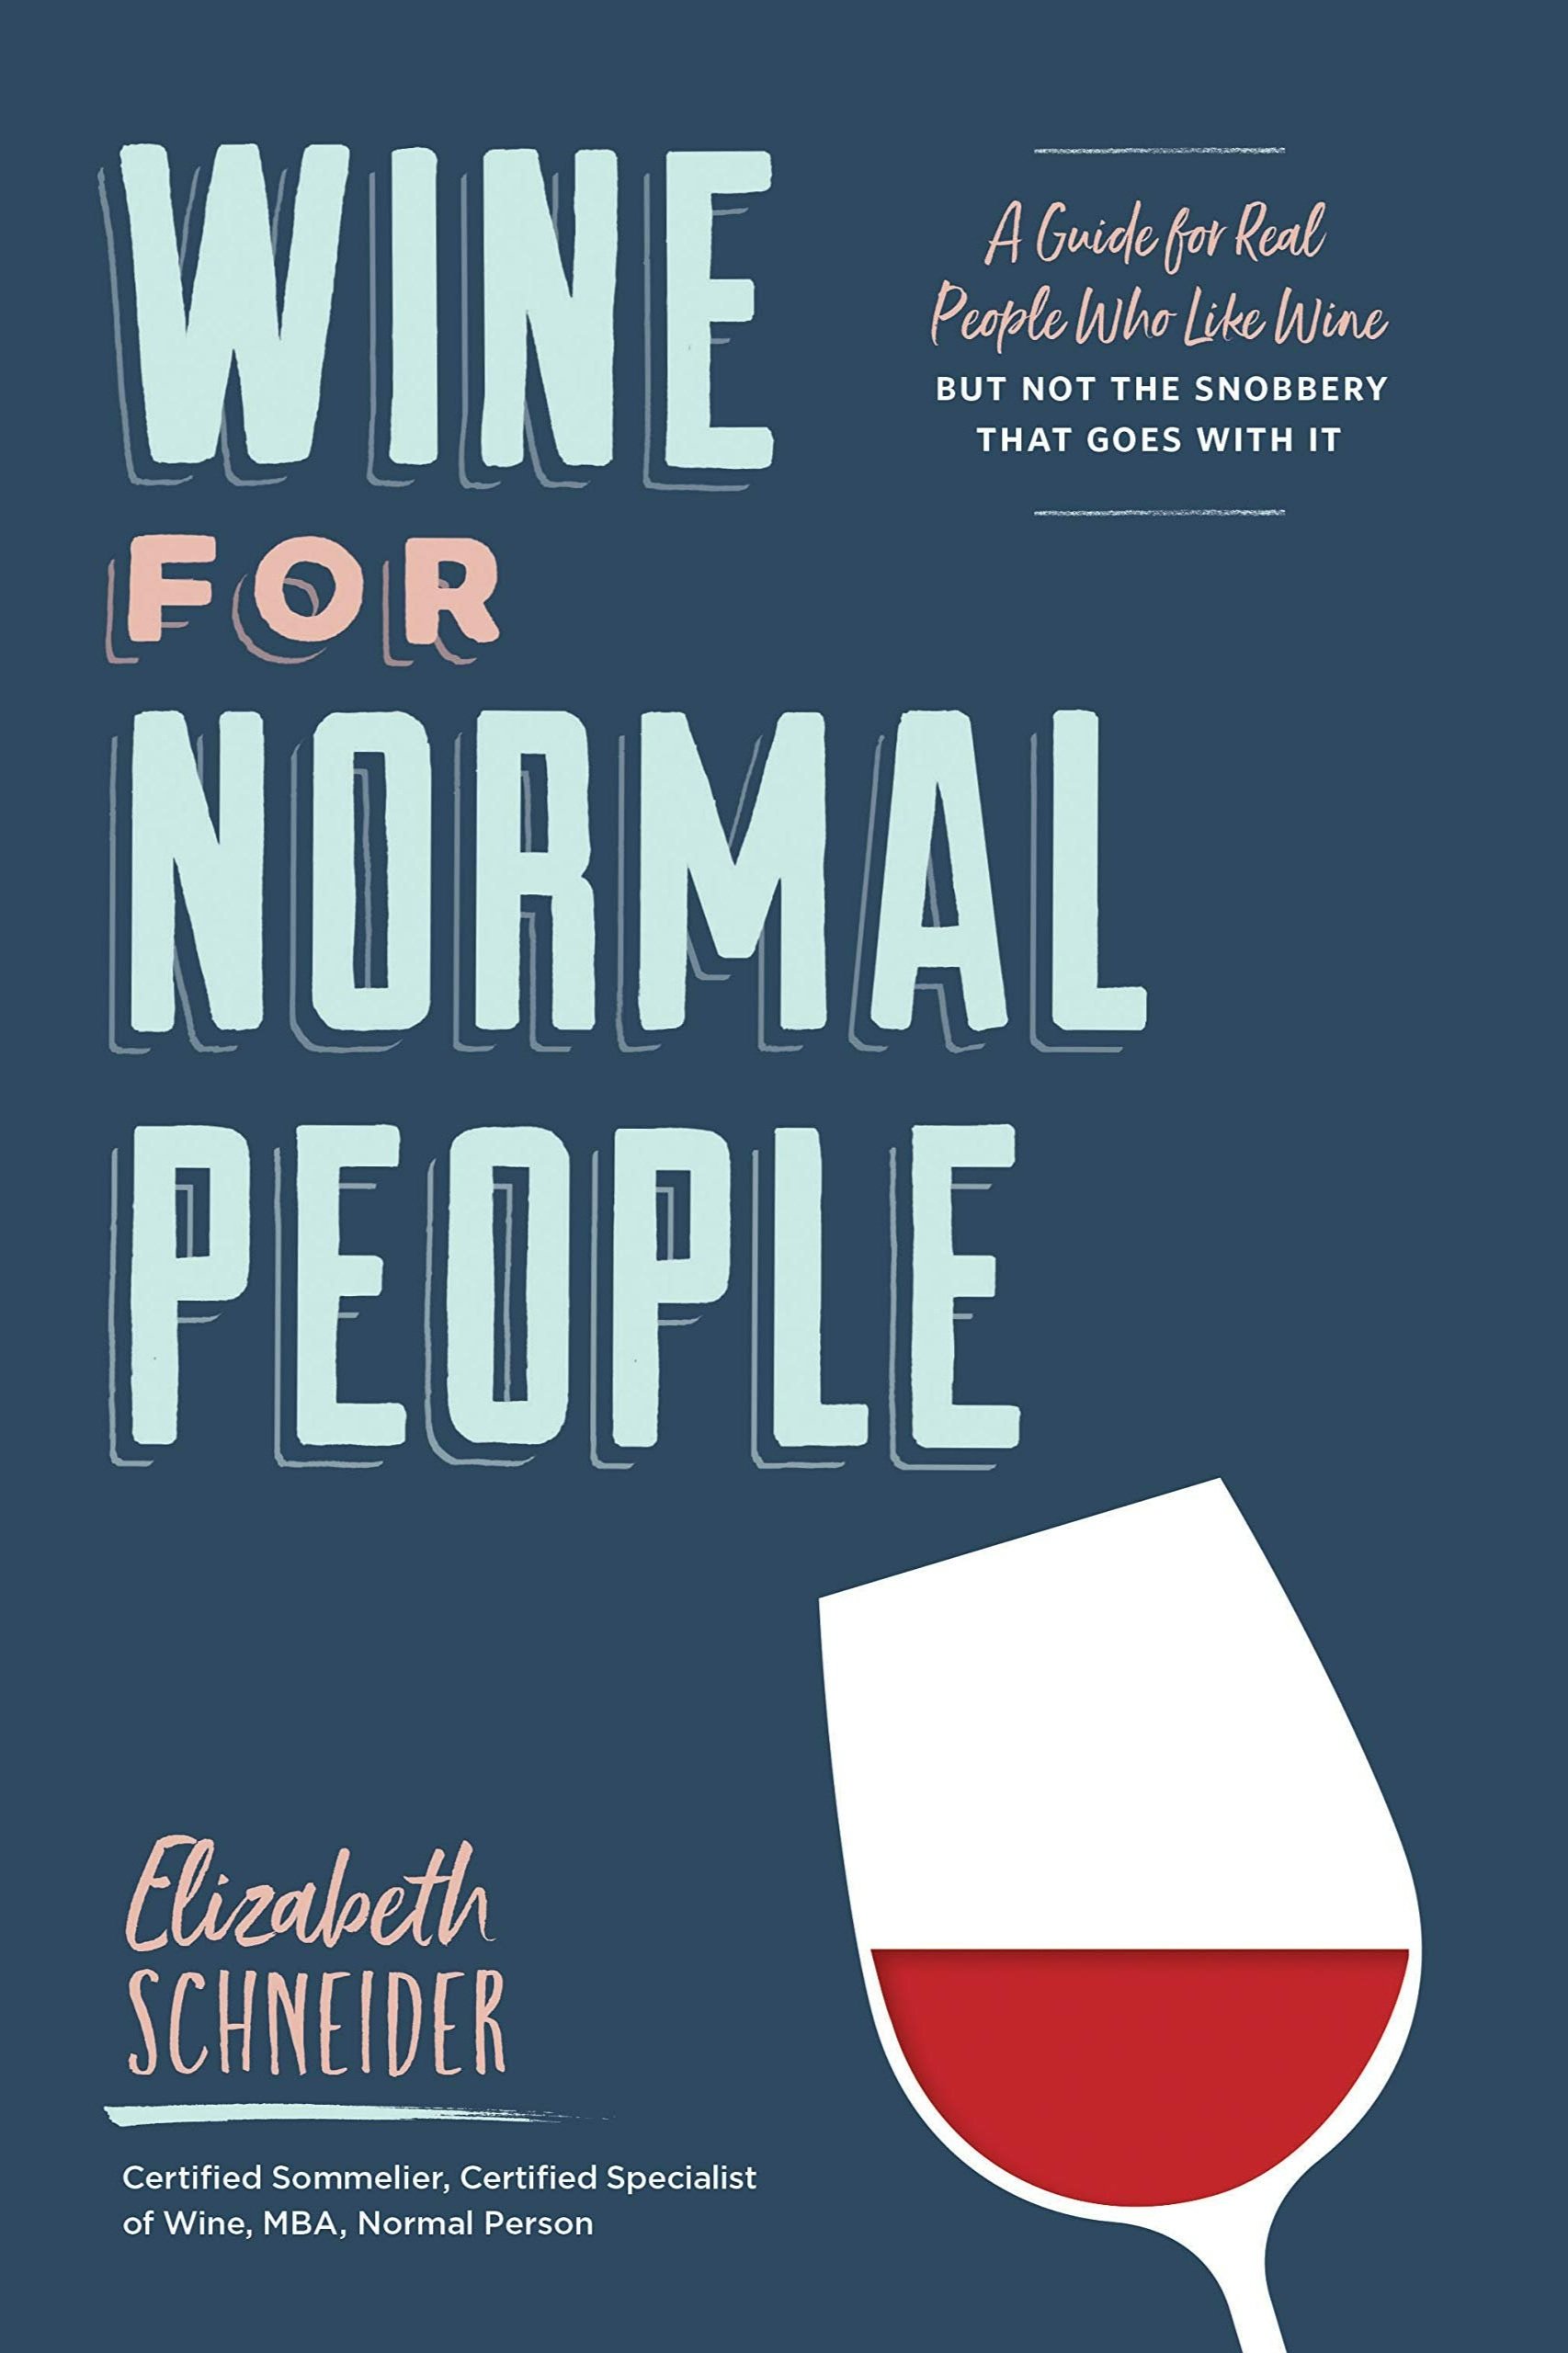 An unpretentious guide to everything you ever wanted to know about wine by the creator and host of the award-winning podcast Wine for Normal People.